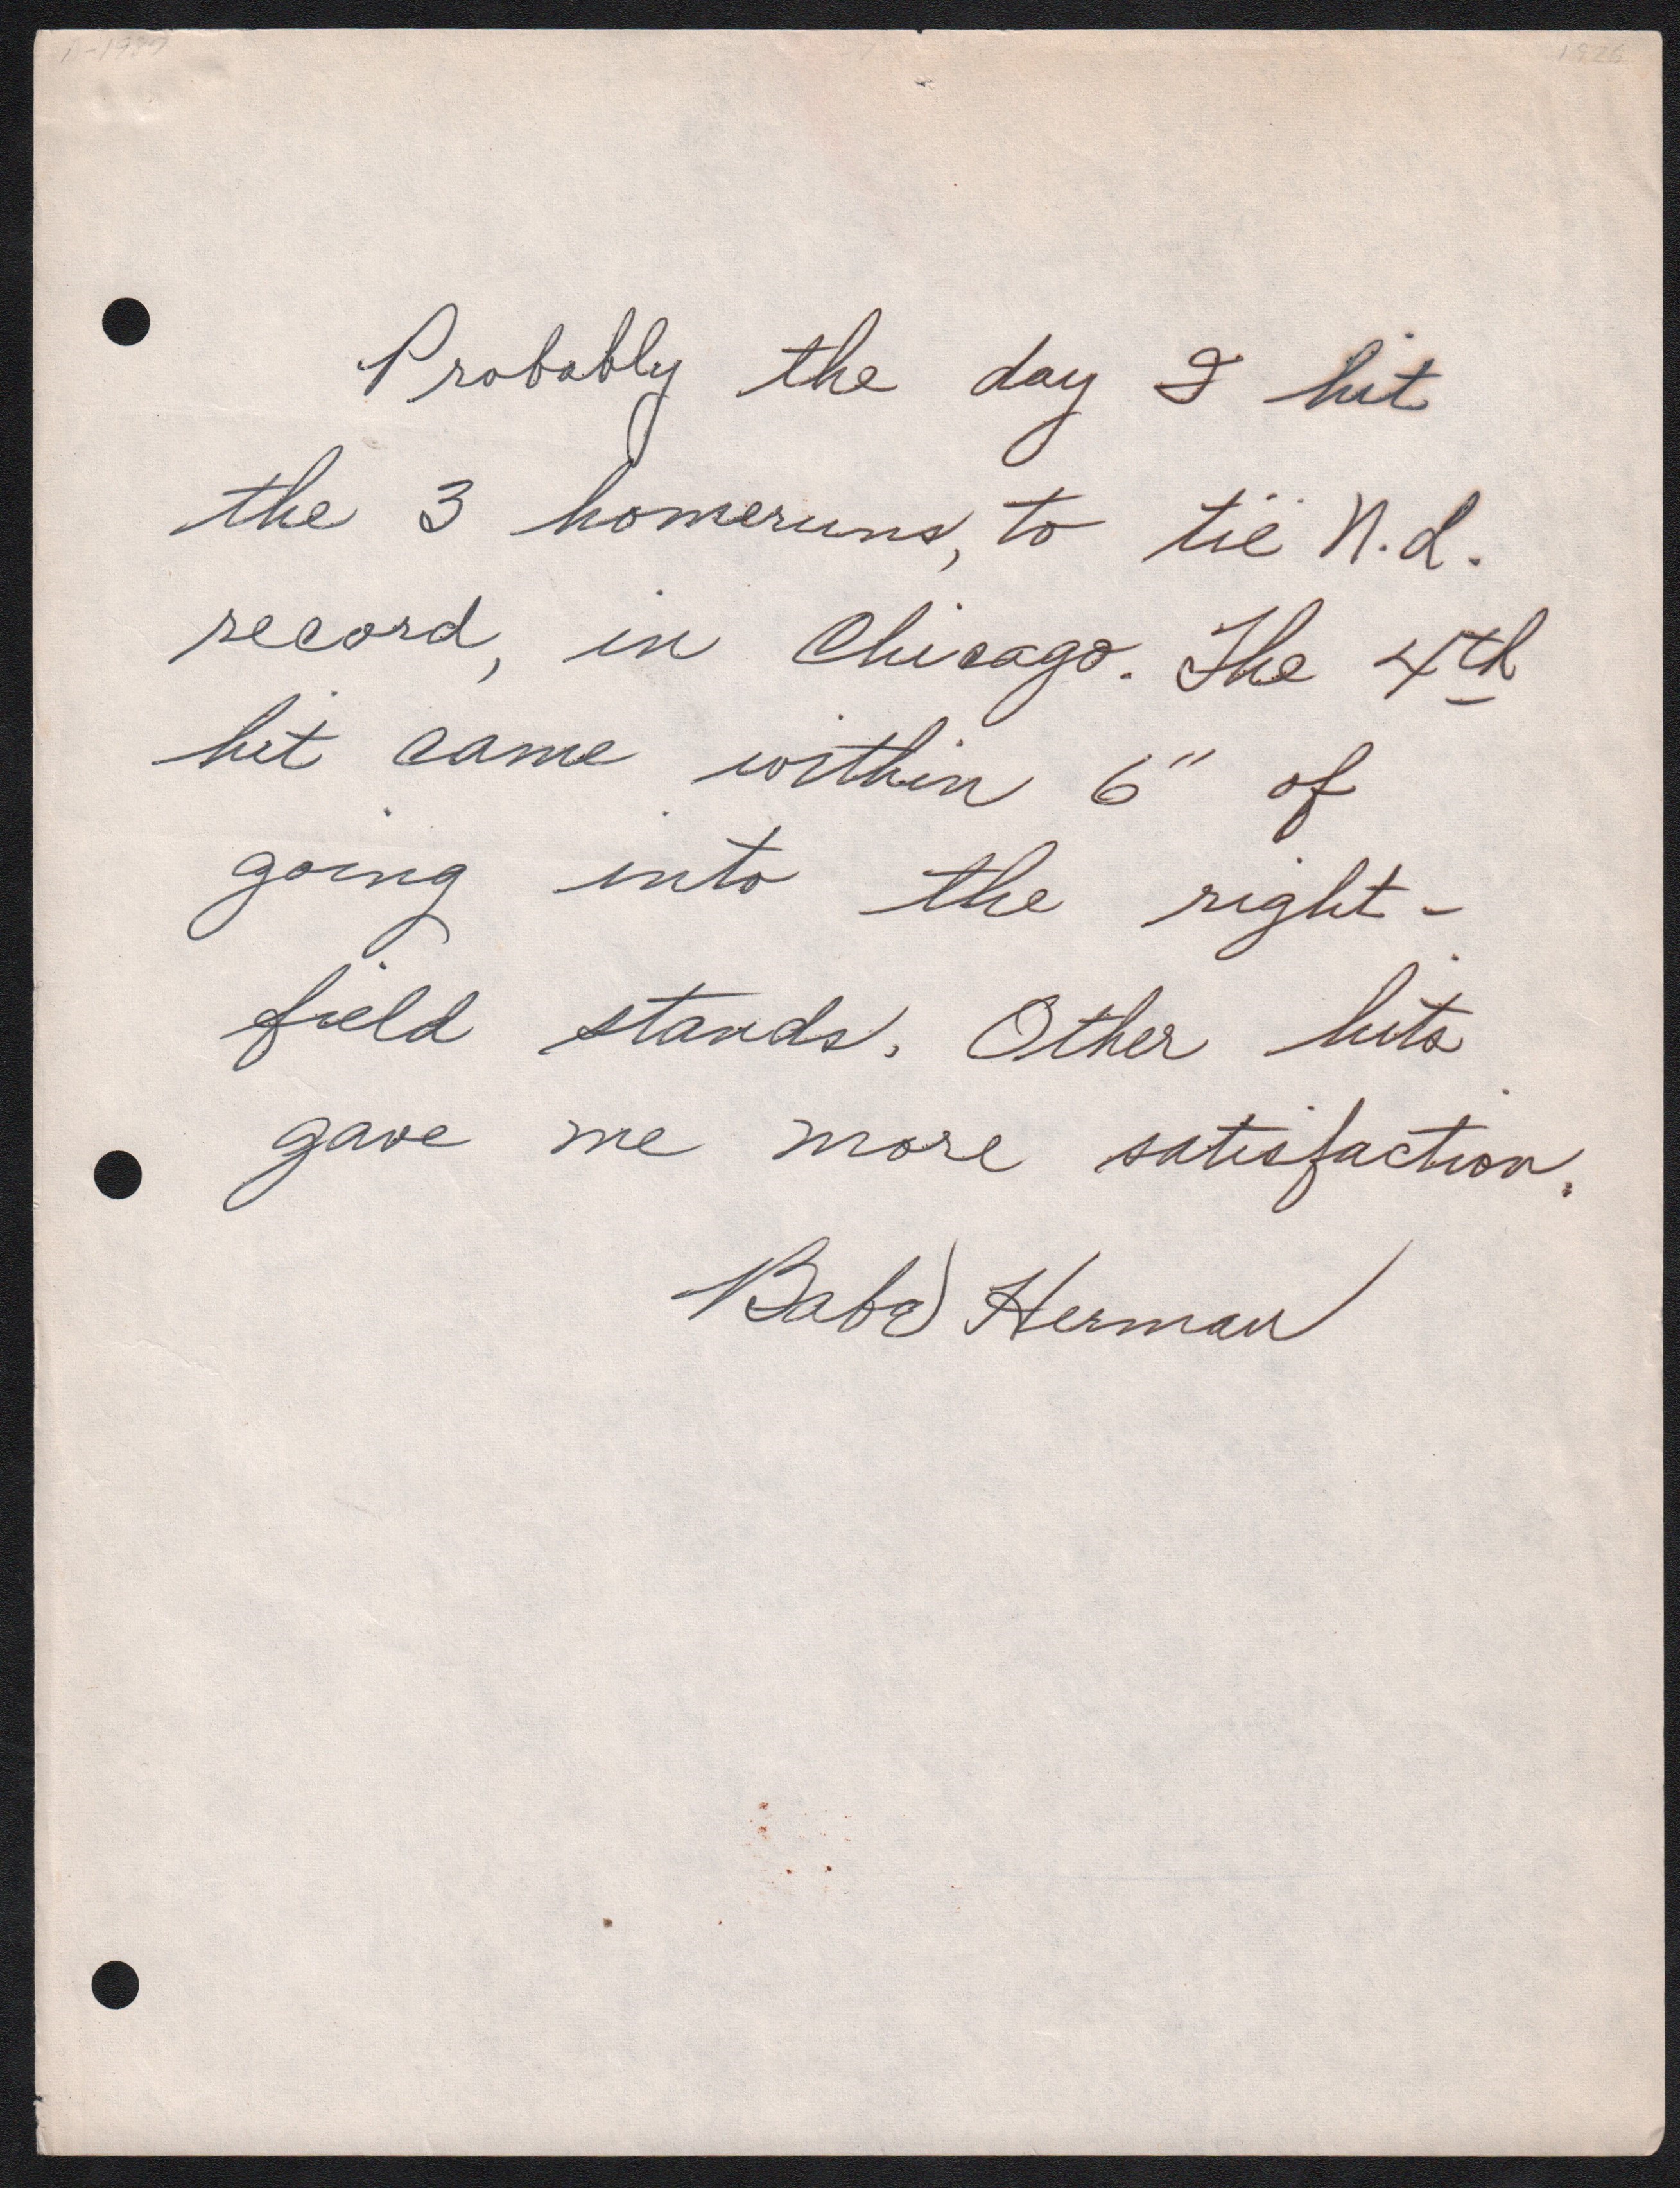 Babe Ruth - Babe Herman Signed Greatest Moment Letter 3-HRs to Tie N.L. Record